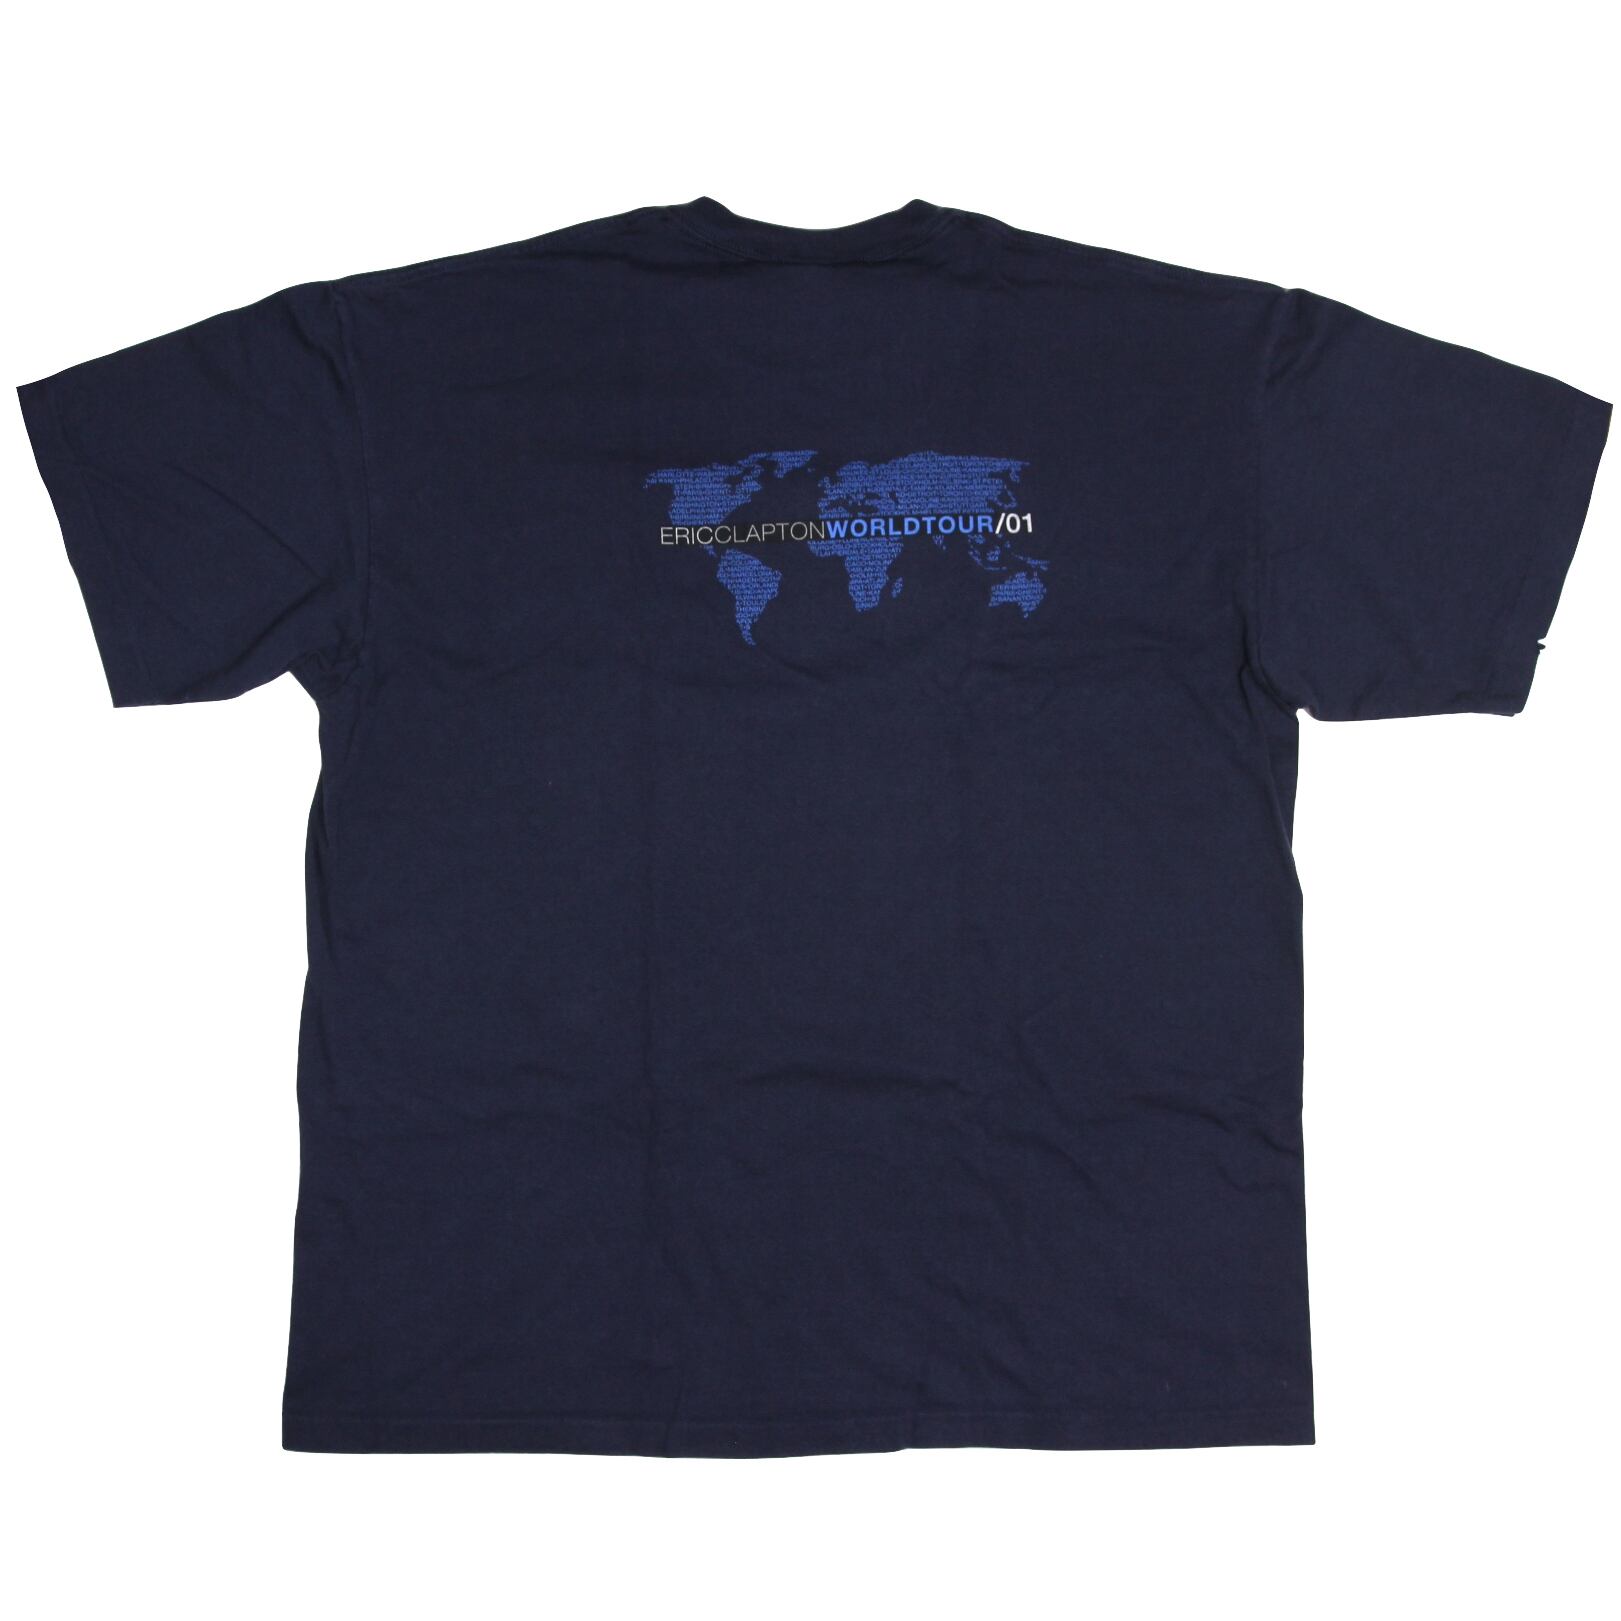 USED【XL】Vintage 00s Eric Clapton World Tour 2001 Tee | Jubilee Vintage  powered by BASE